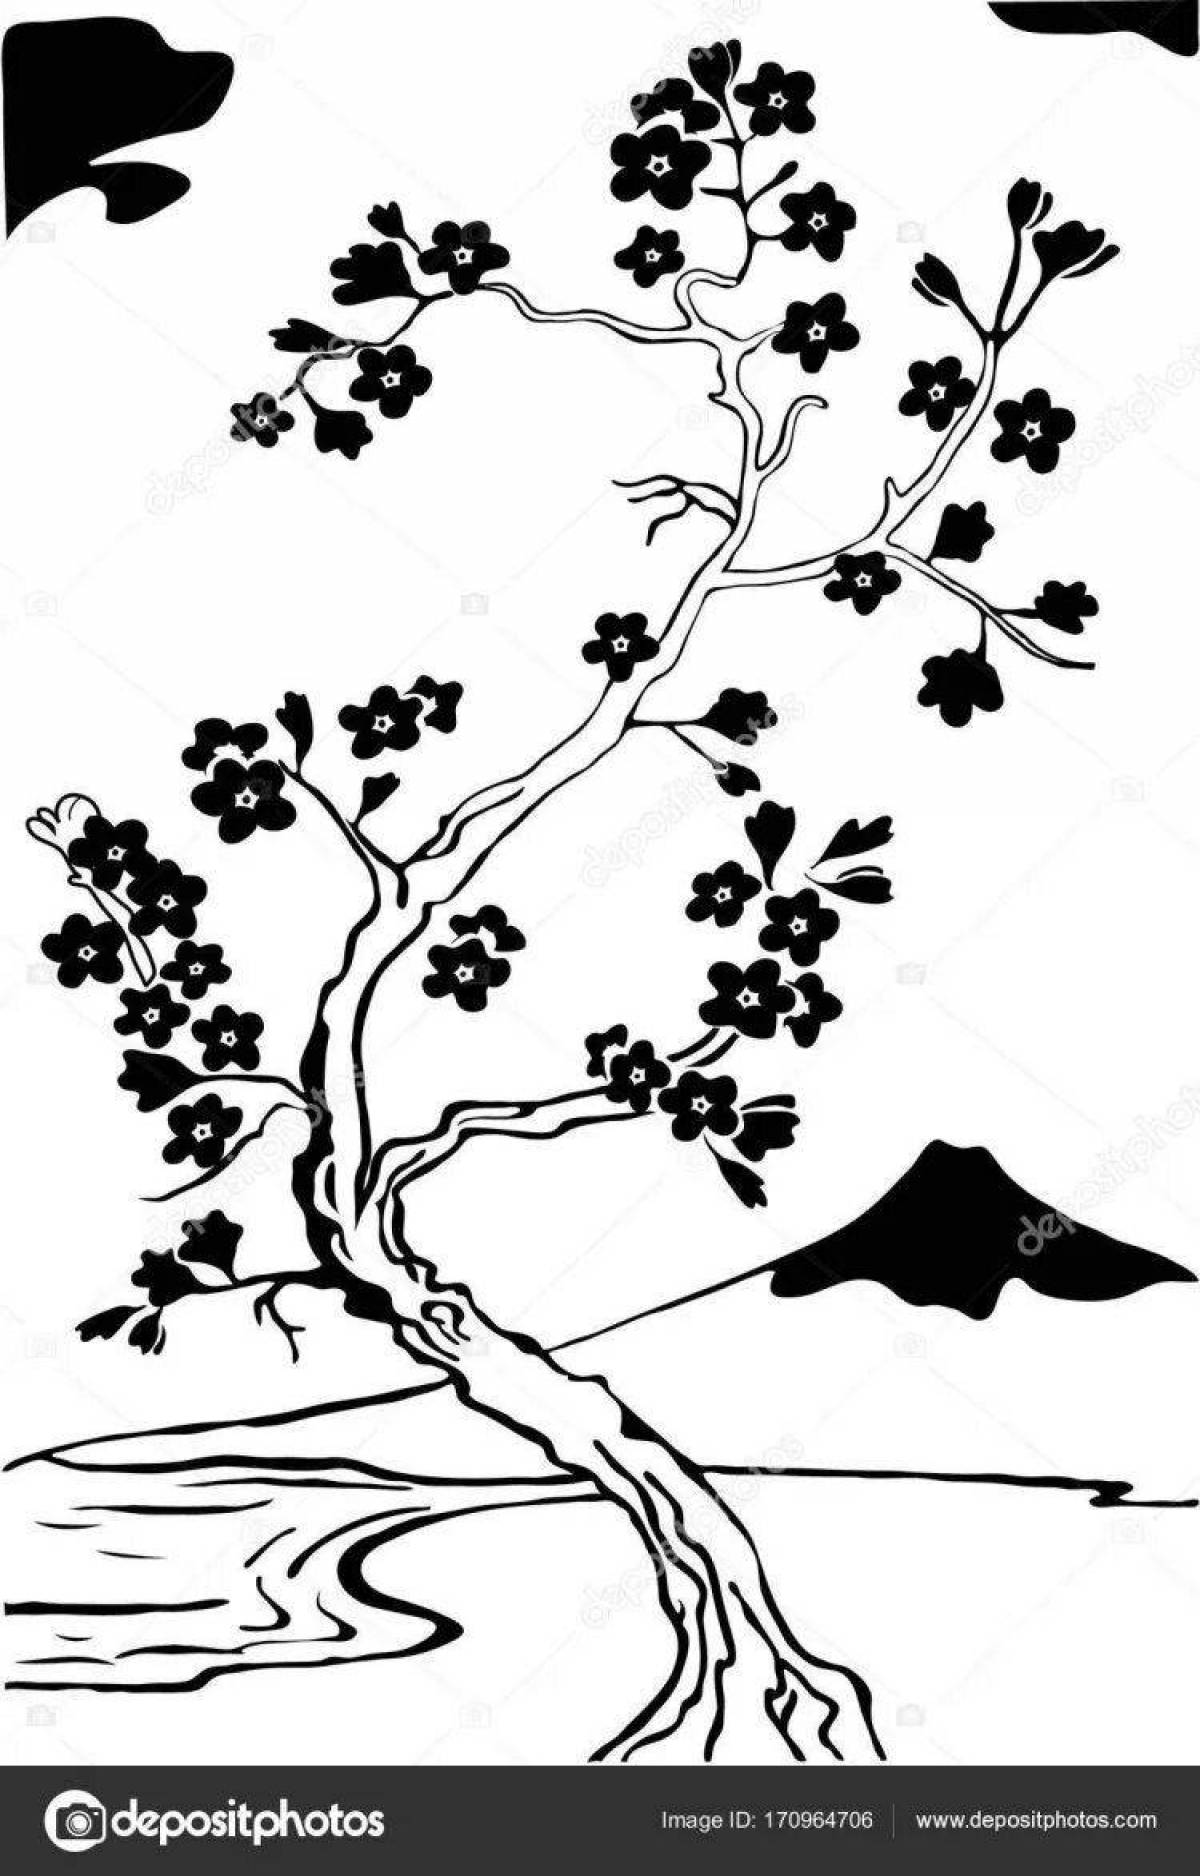 Adorable Japanese tree coloring page